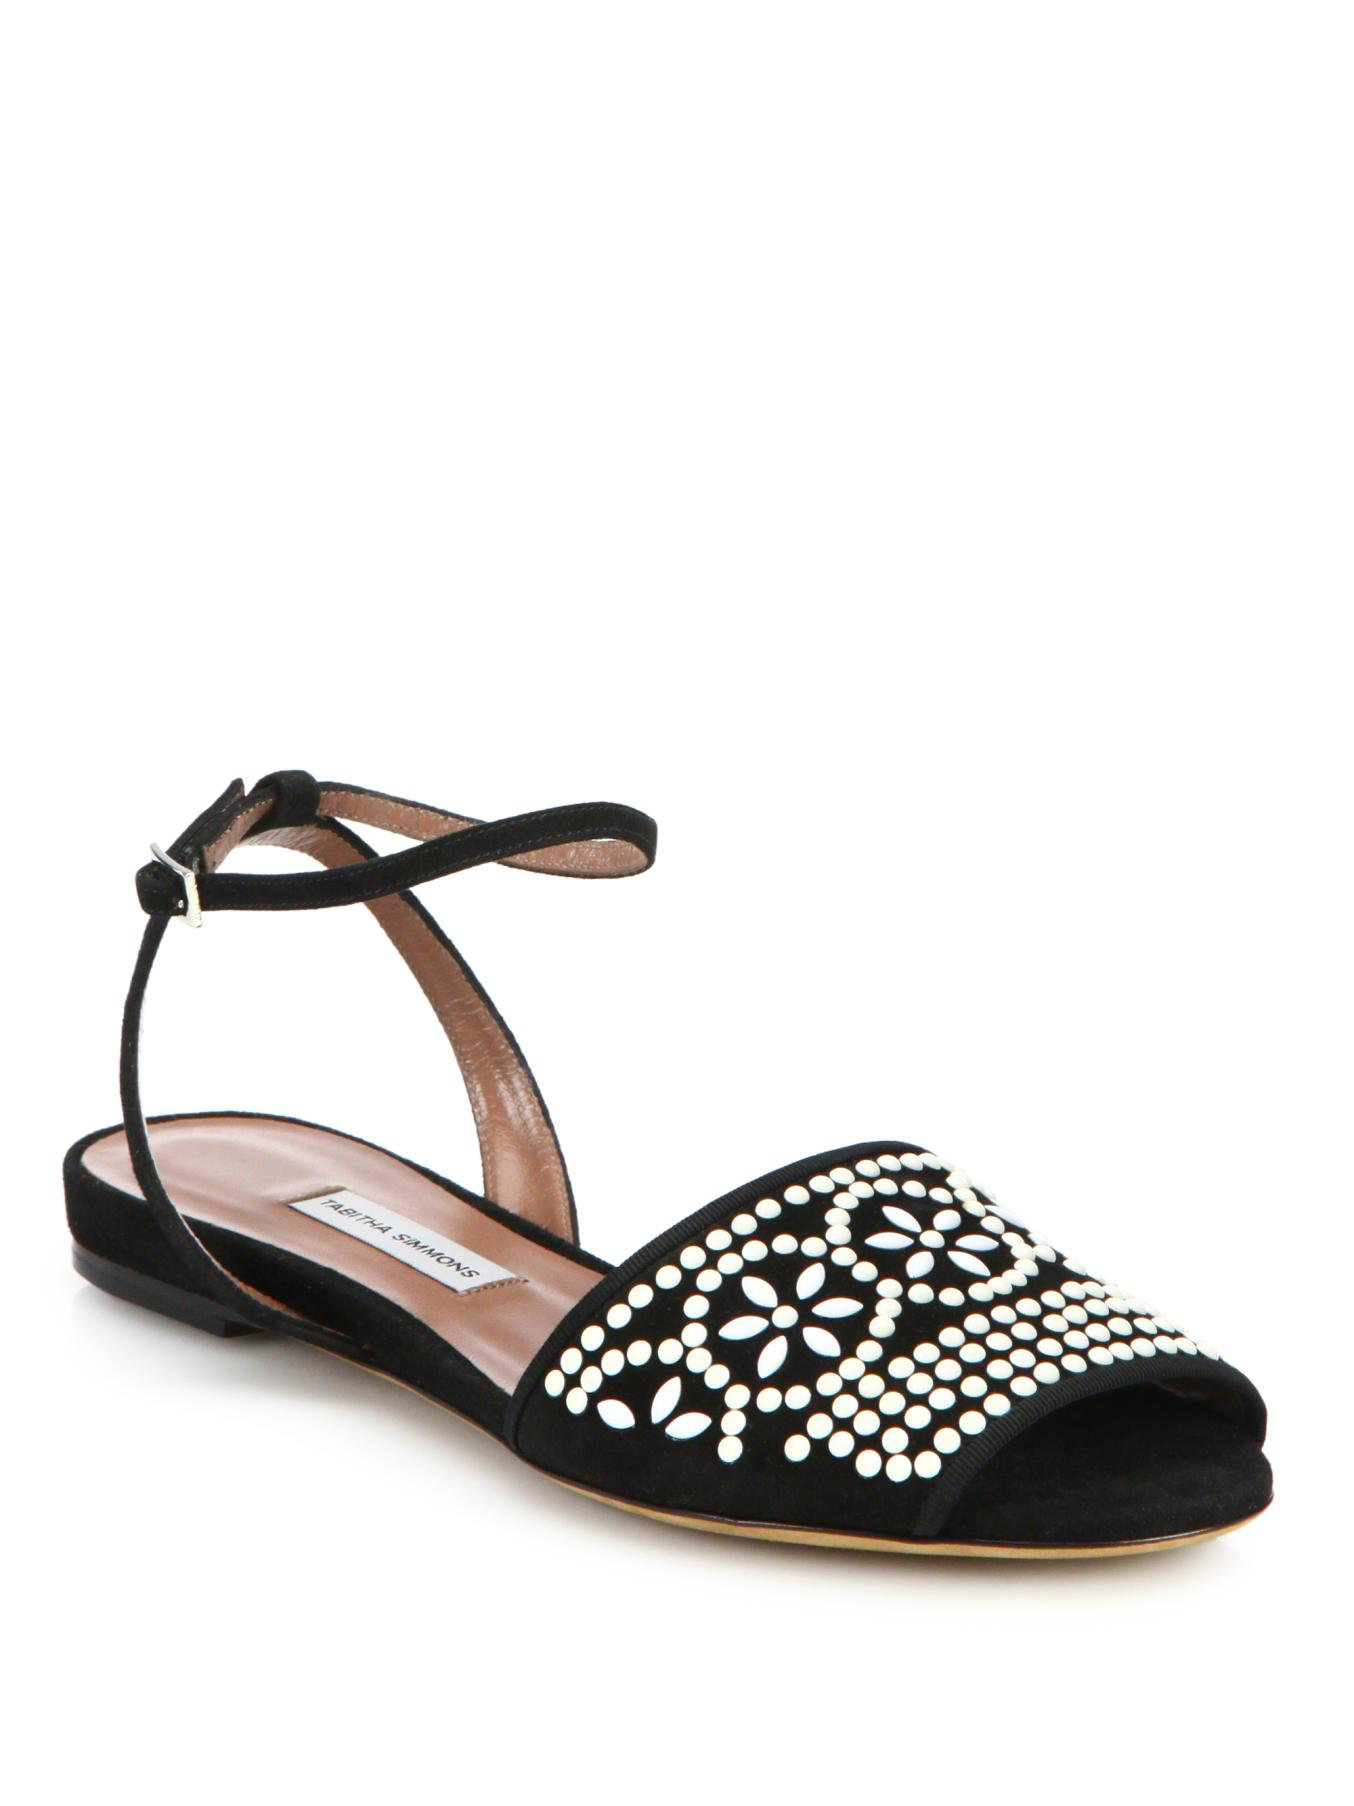 Lyst - Tabitha Simmons Beaded Flat Suede Sandals in Black